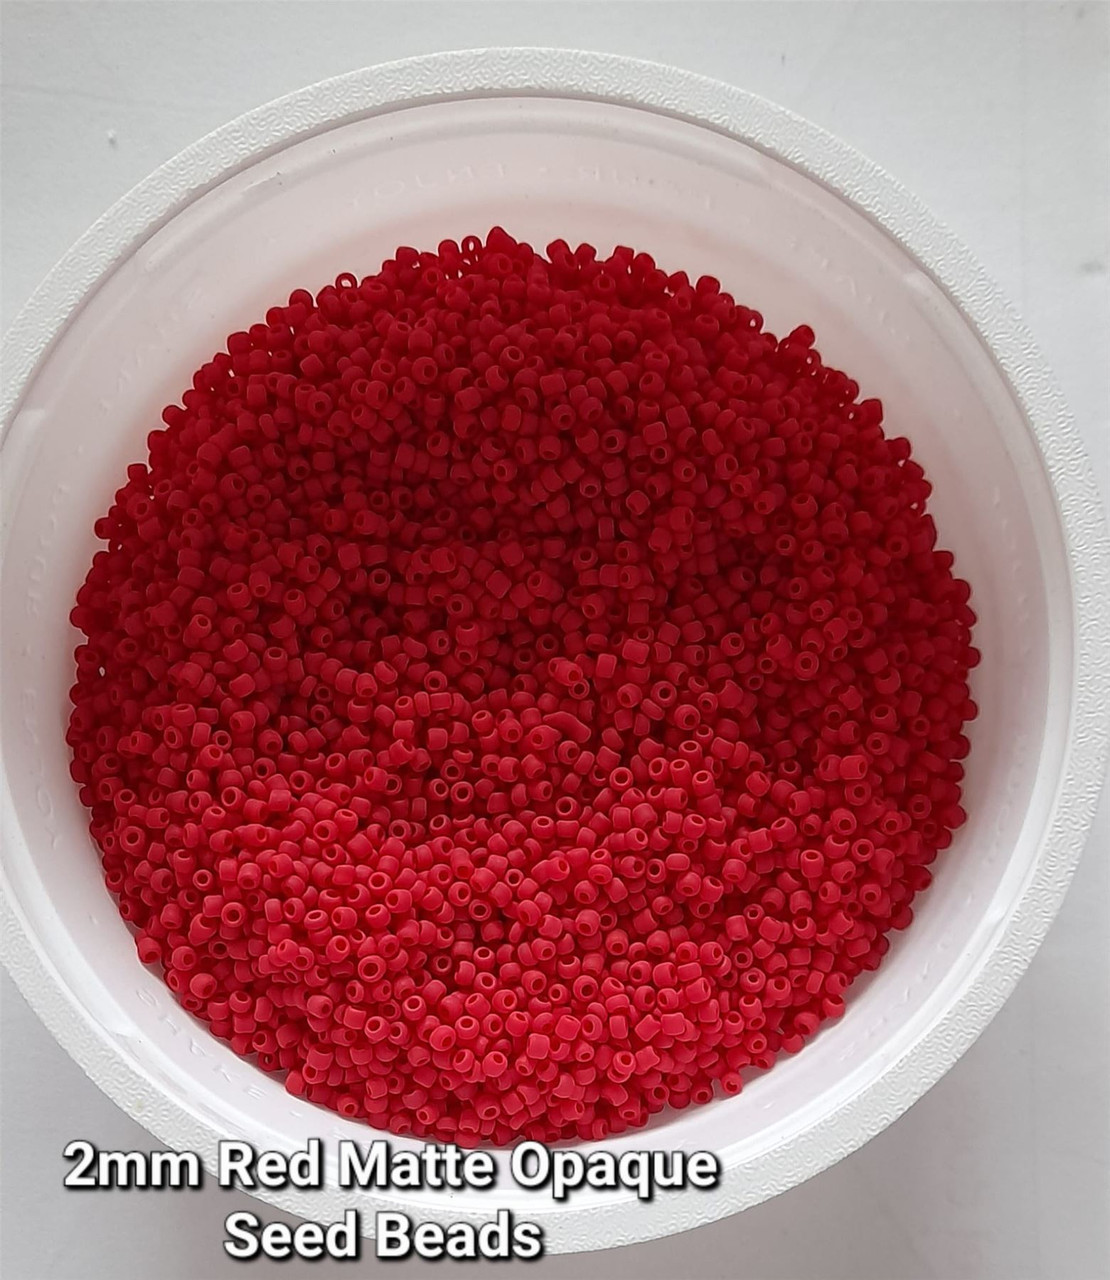 Red Matte Opaque 11/0 seed beads